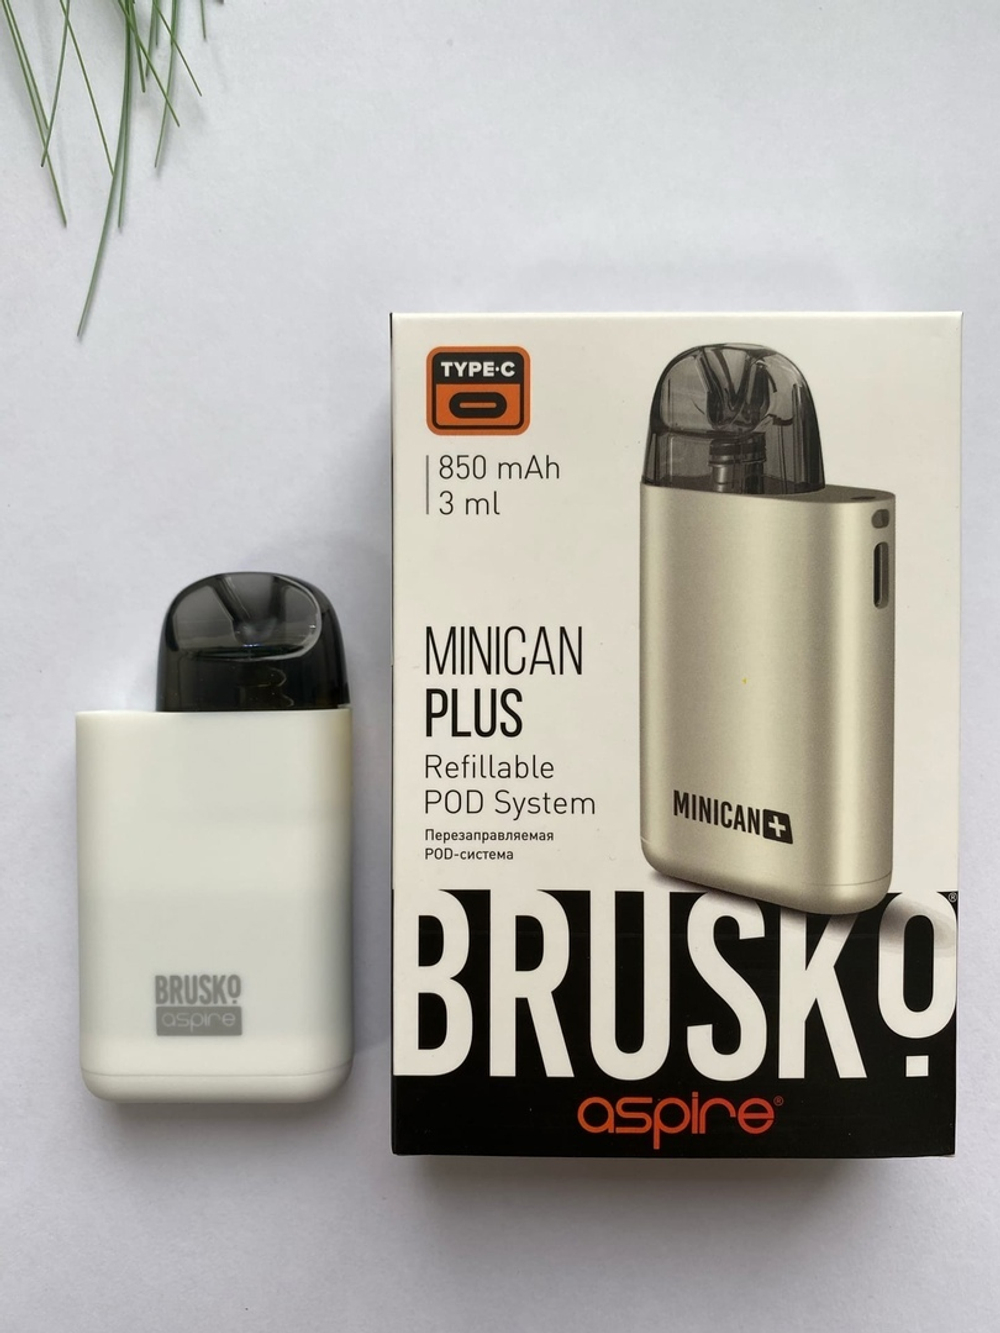 Minican PLUS by Brusko 850мАч